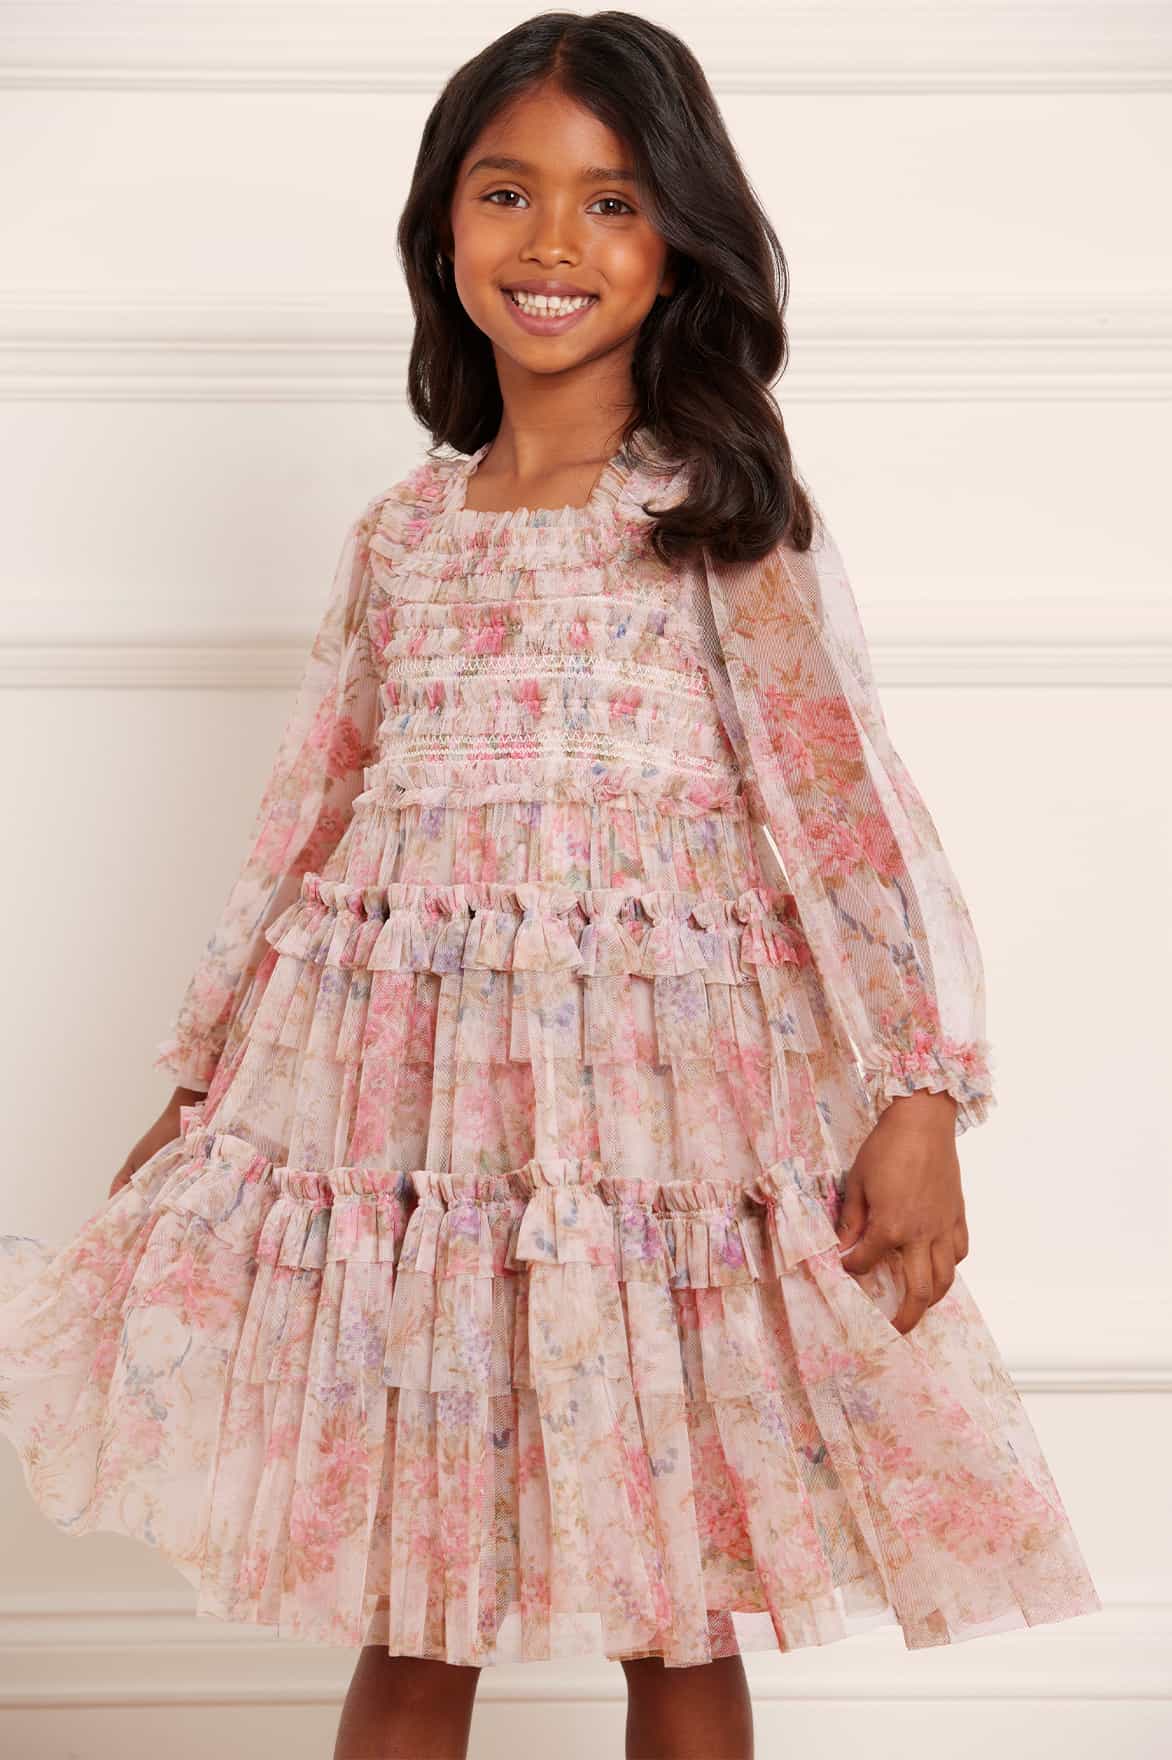 Flower Girl Pageant Dress With Lace Appliques And Puffy Tulle Princess  Skirt Perfect For Formal Occasions And Proms From Dresstop, $102.52 |  DHgate.Com